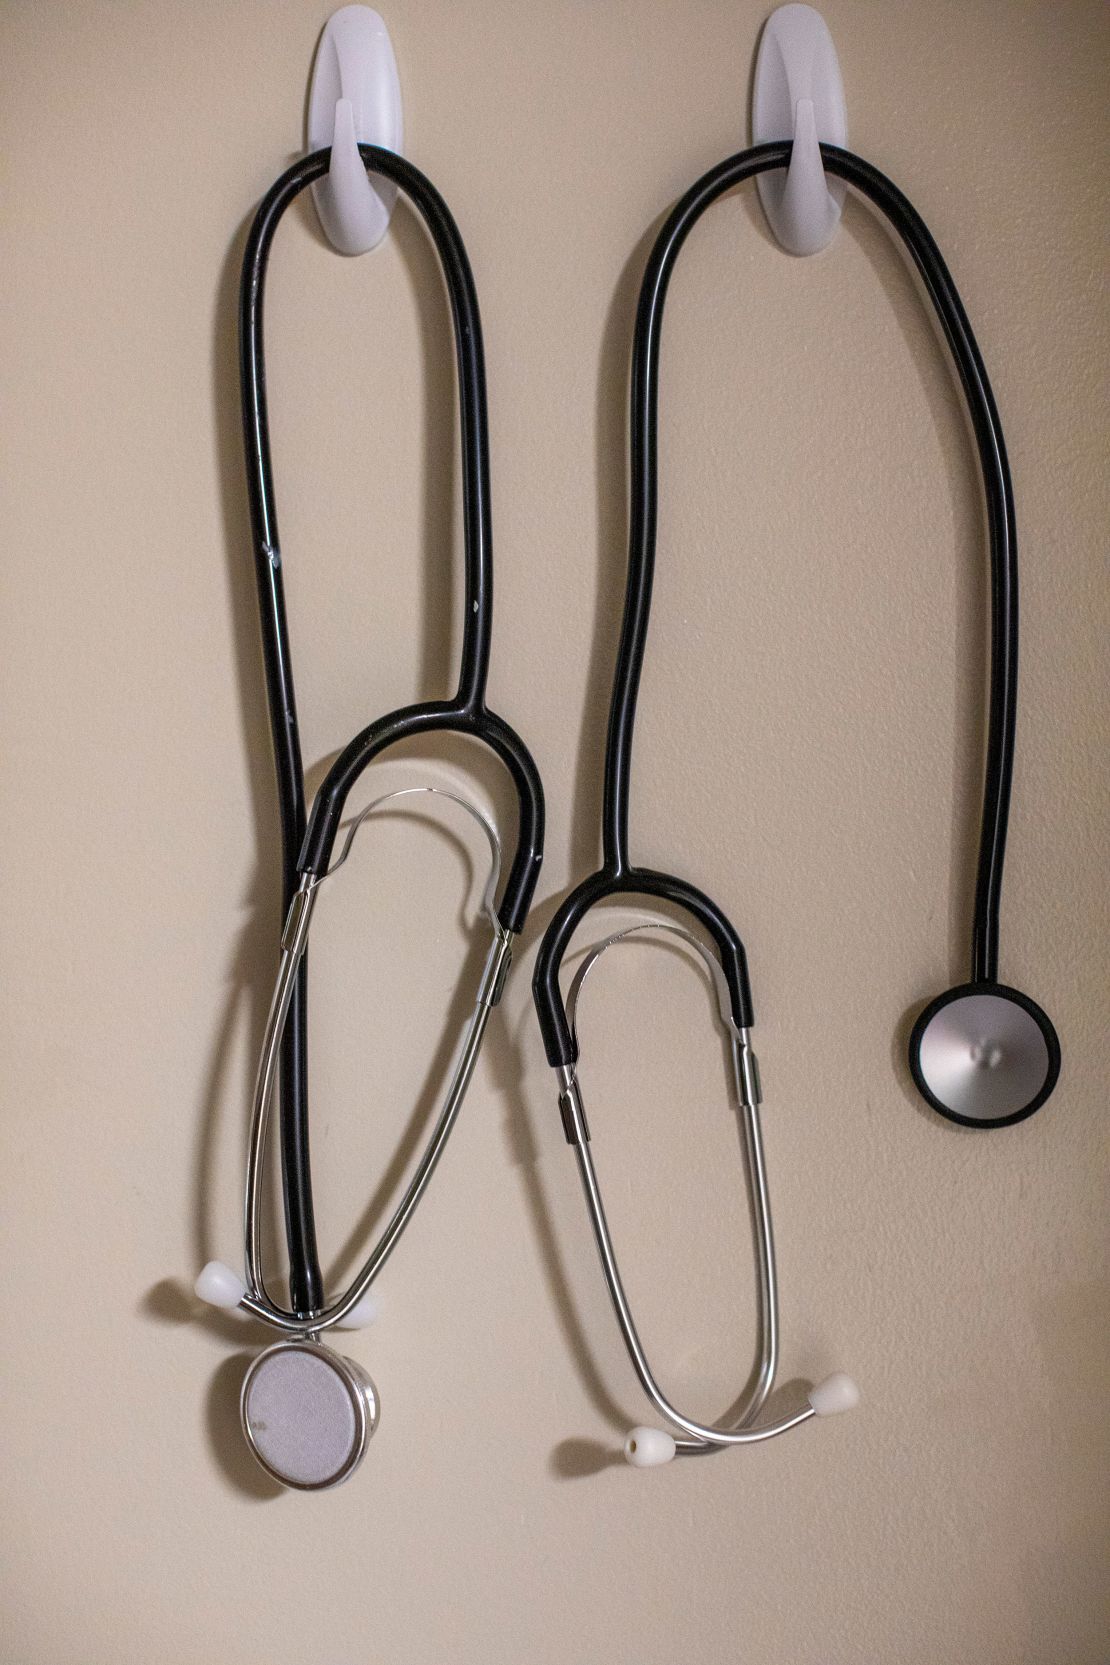 Stethoscopes hang on a wall inside a birthing room.